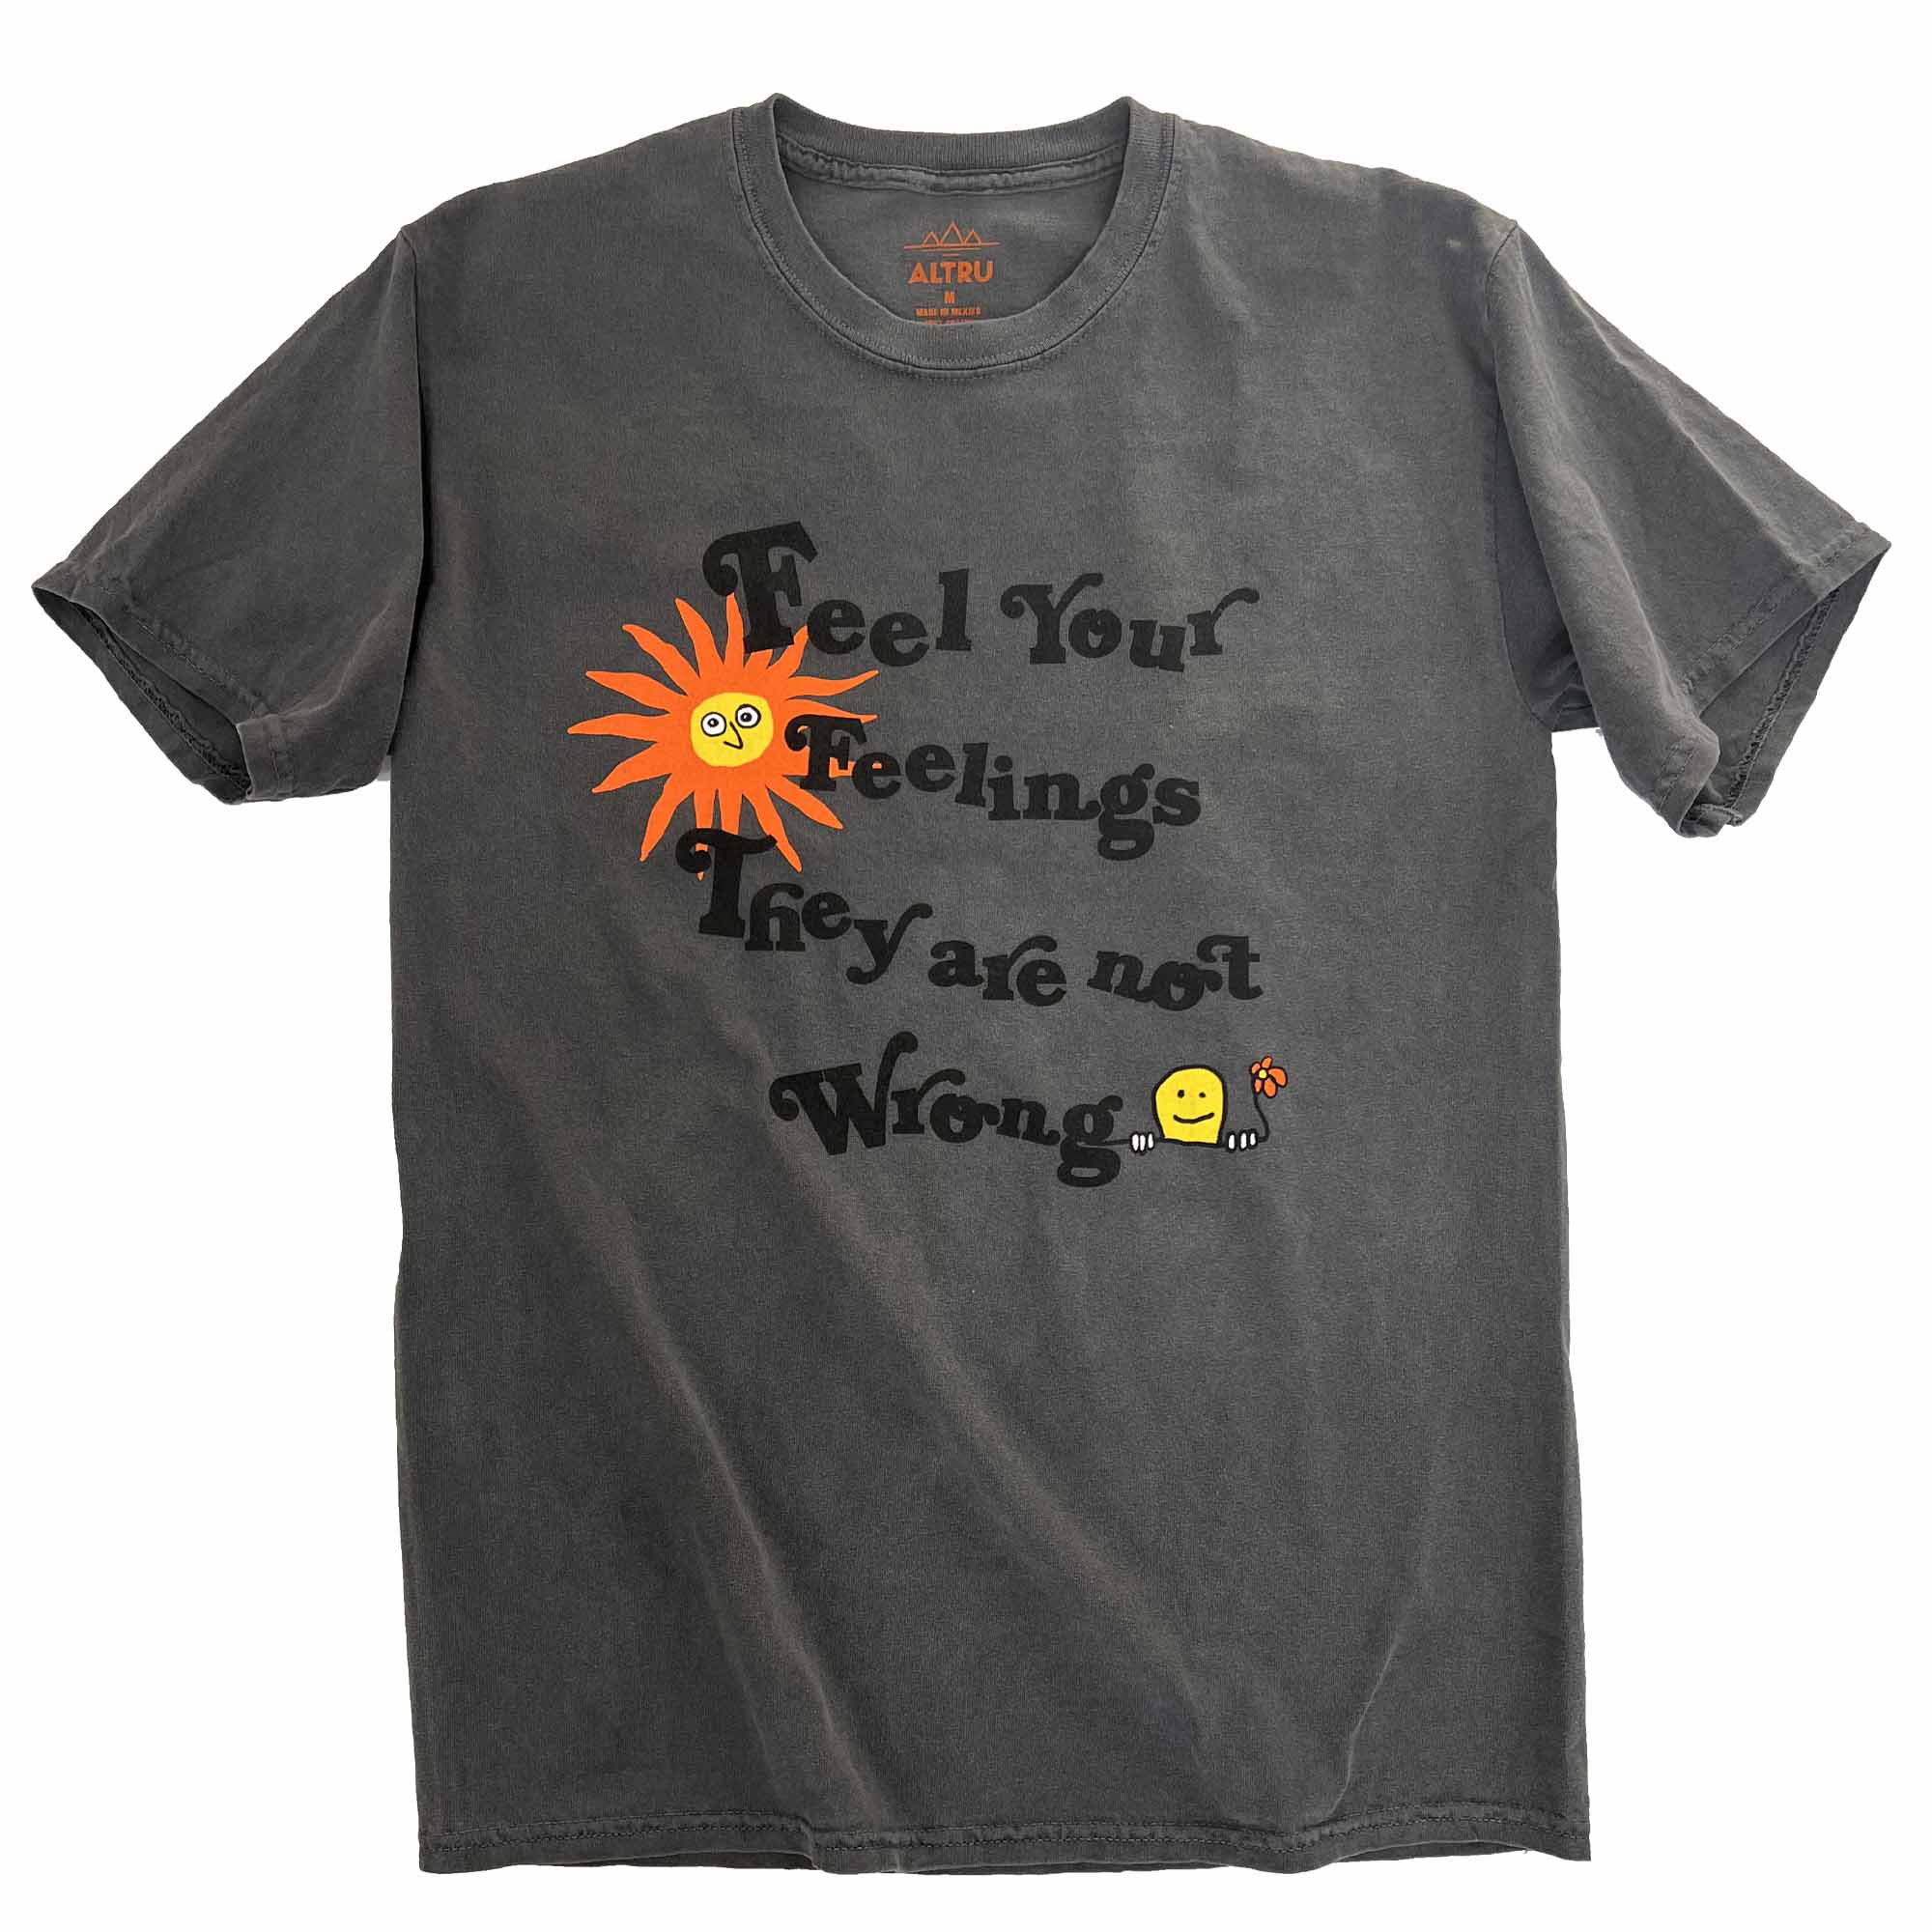 Altru "Feel your feelings they are not wrong" t-shirt. Positive text printed on pigment dye vintage black. Front image